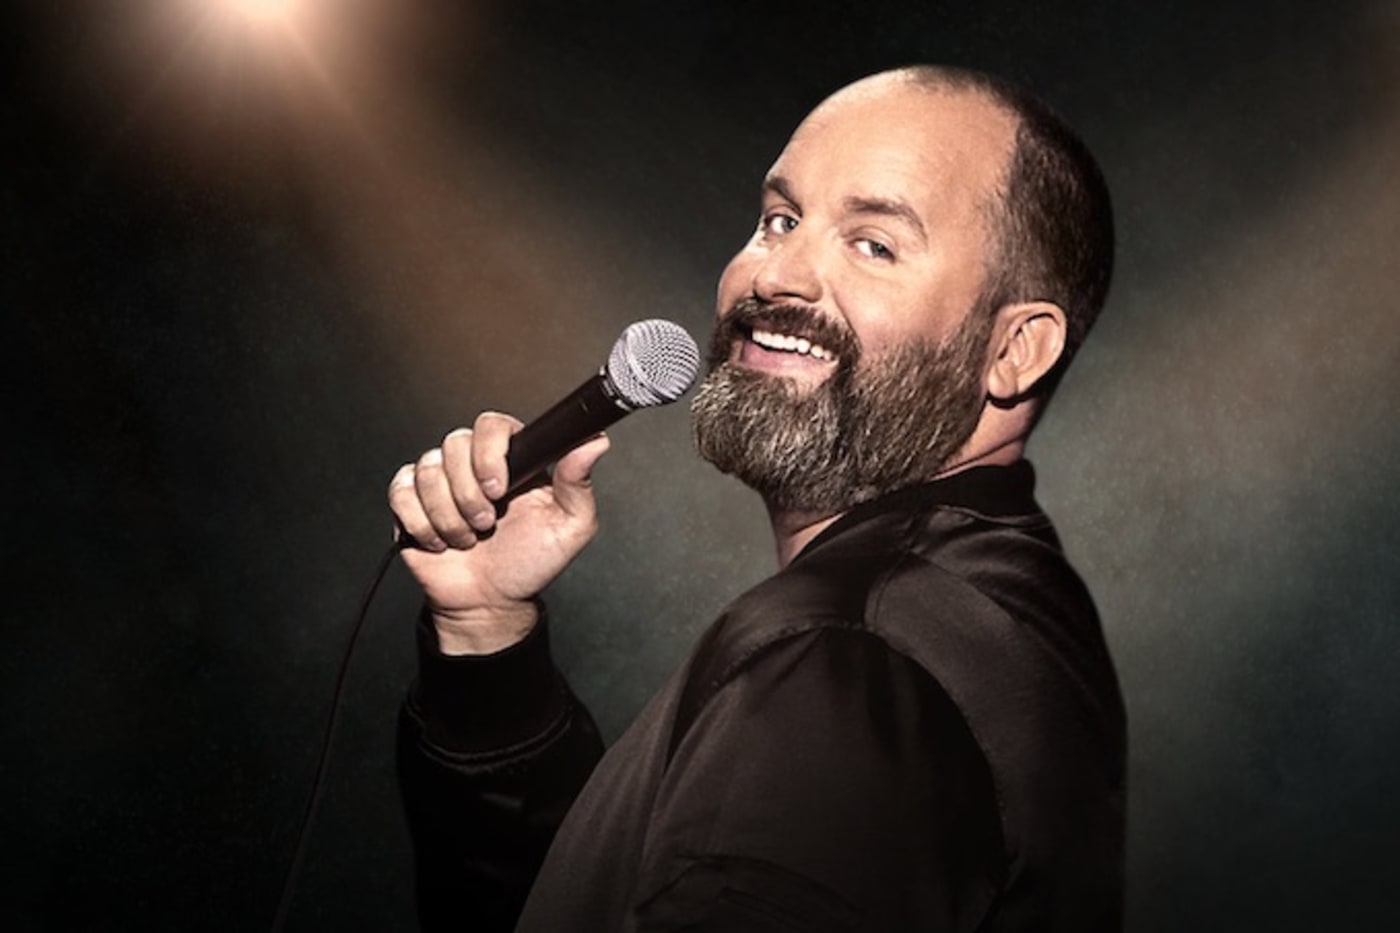 Tom Segura Discusses His ‘Take It Down’ Tour And The Rapidly Evolving